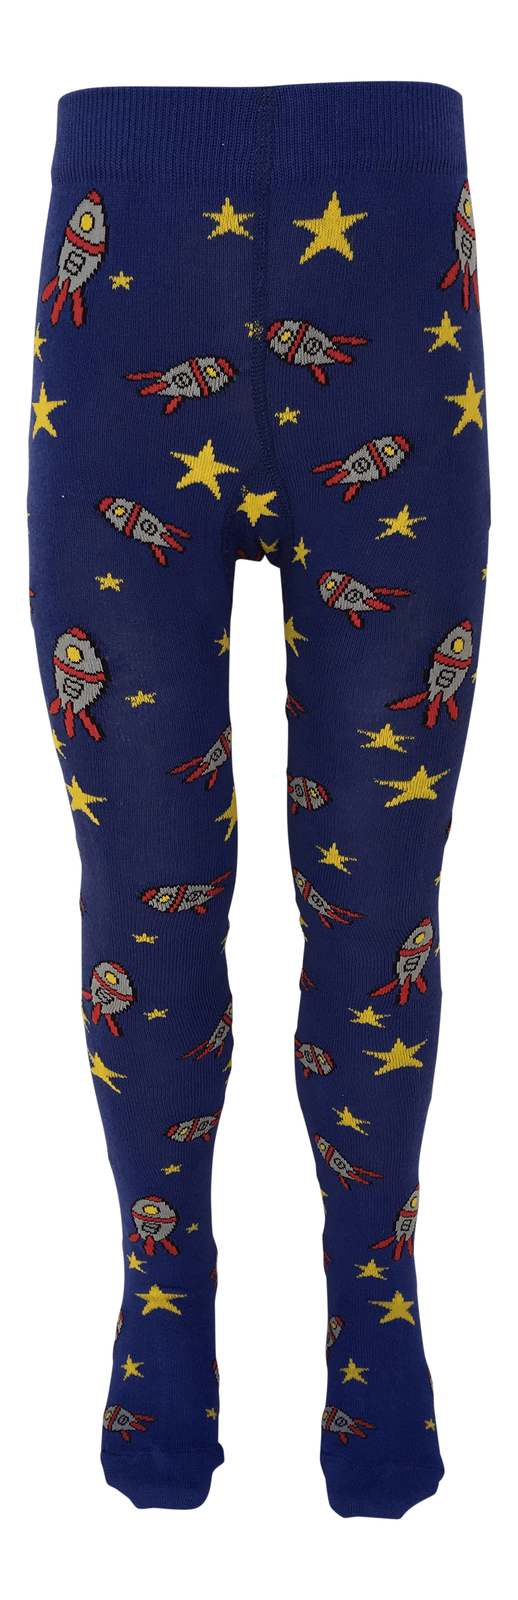 S & S Tights - Out of this World